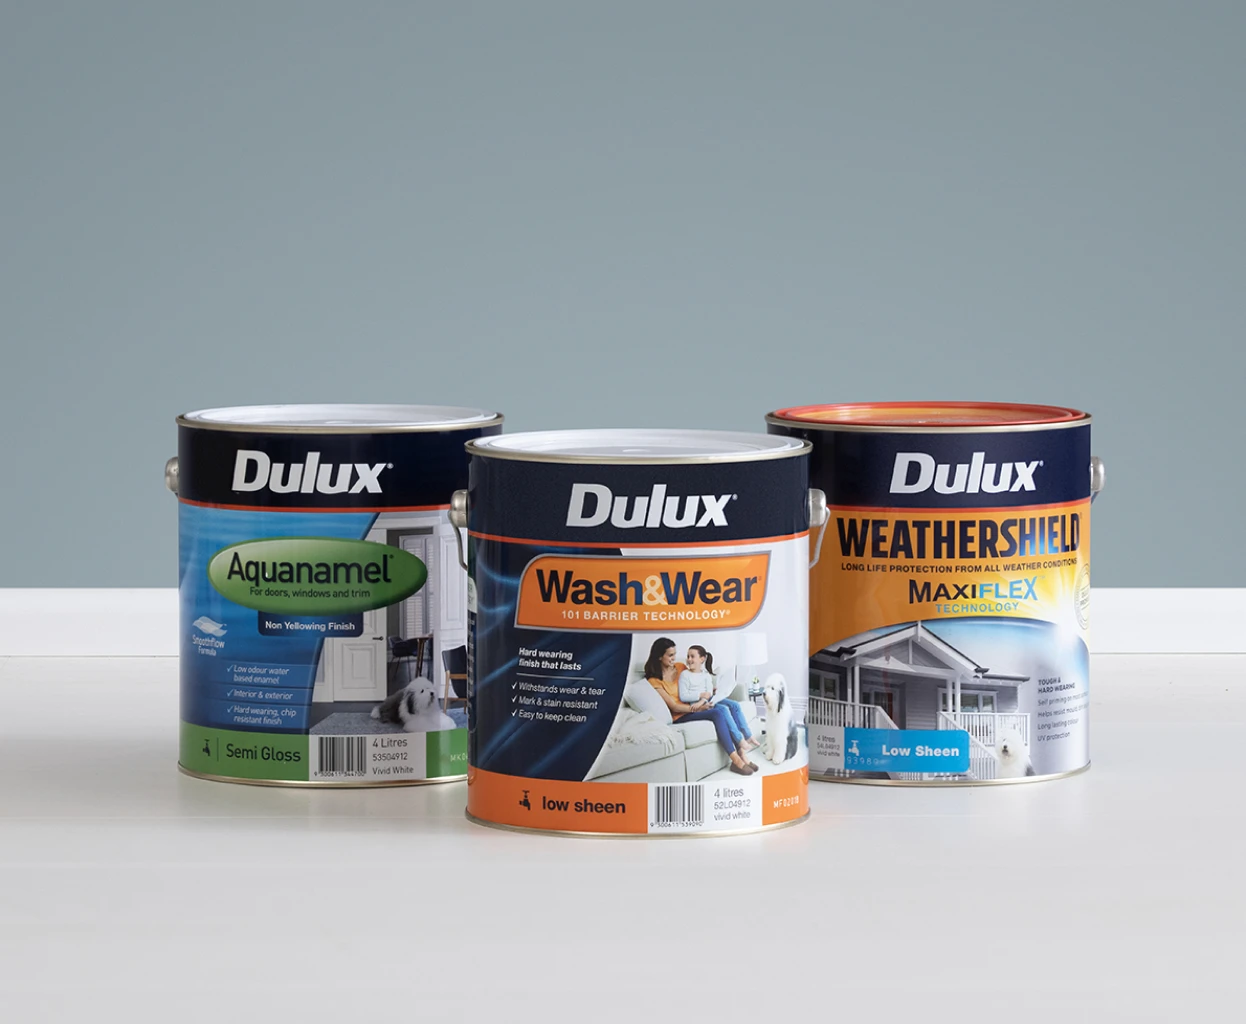 Dulux Wash&Wear, Aquanamel and Weathershield products in front of an interior painted wall